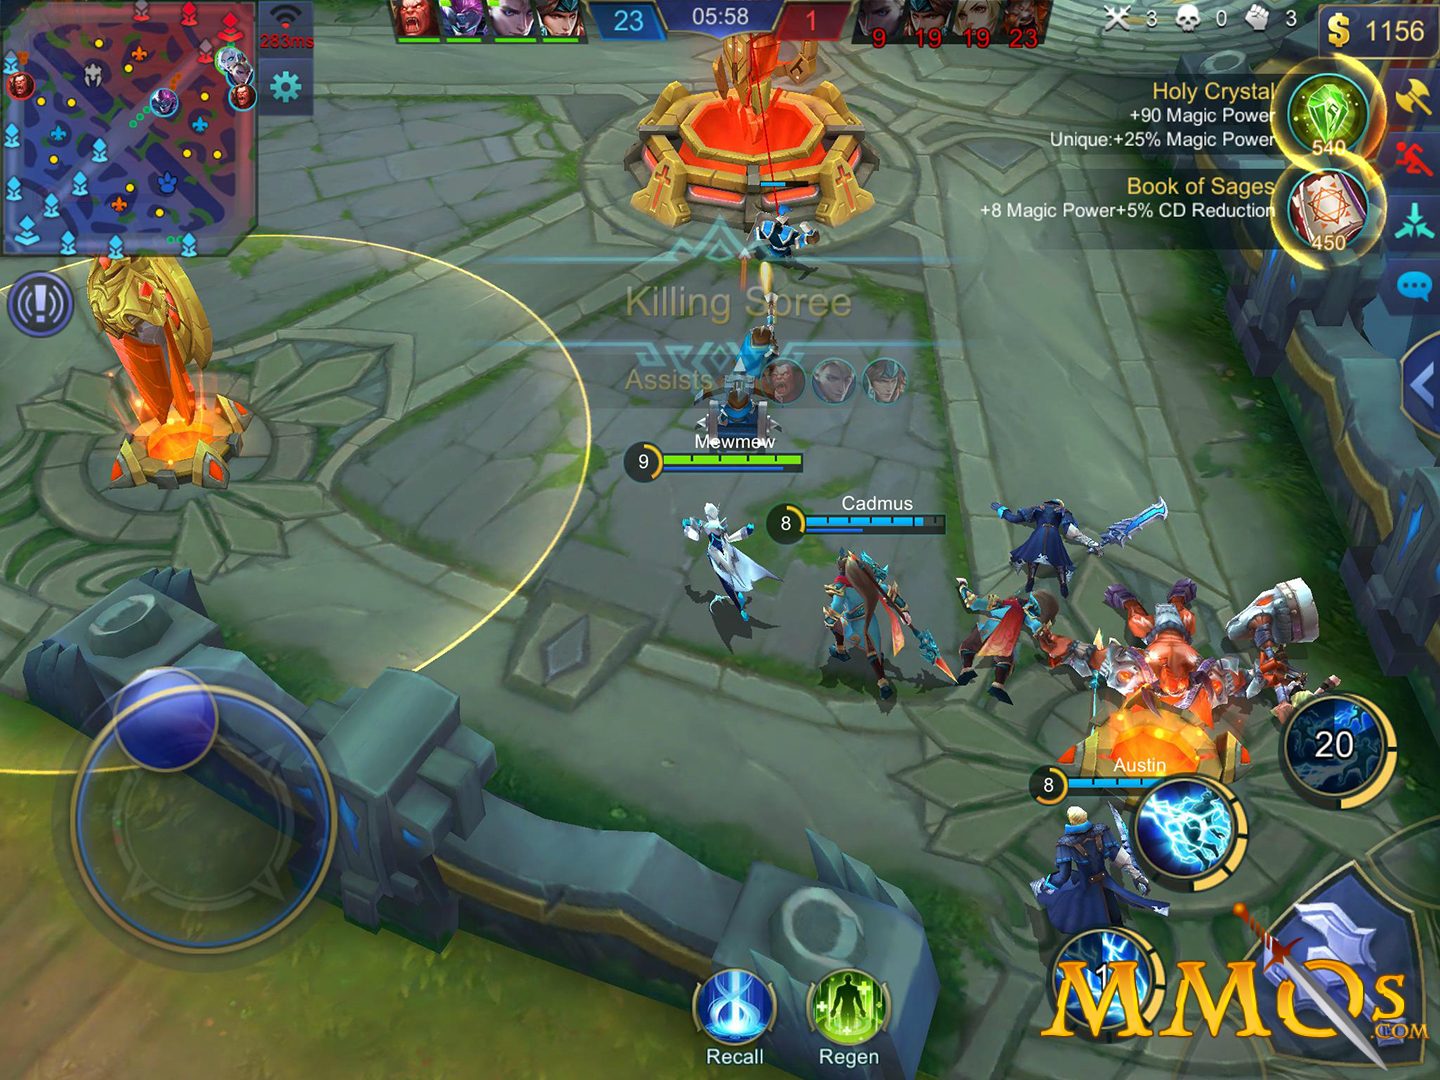  A screenshot of a Mobile Legends game in progress, showing the gameplay with VPN settings.